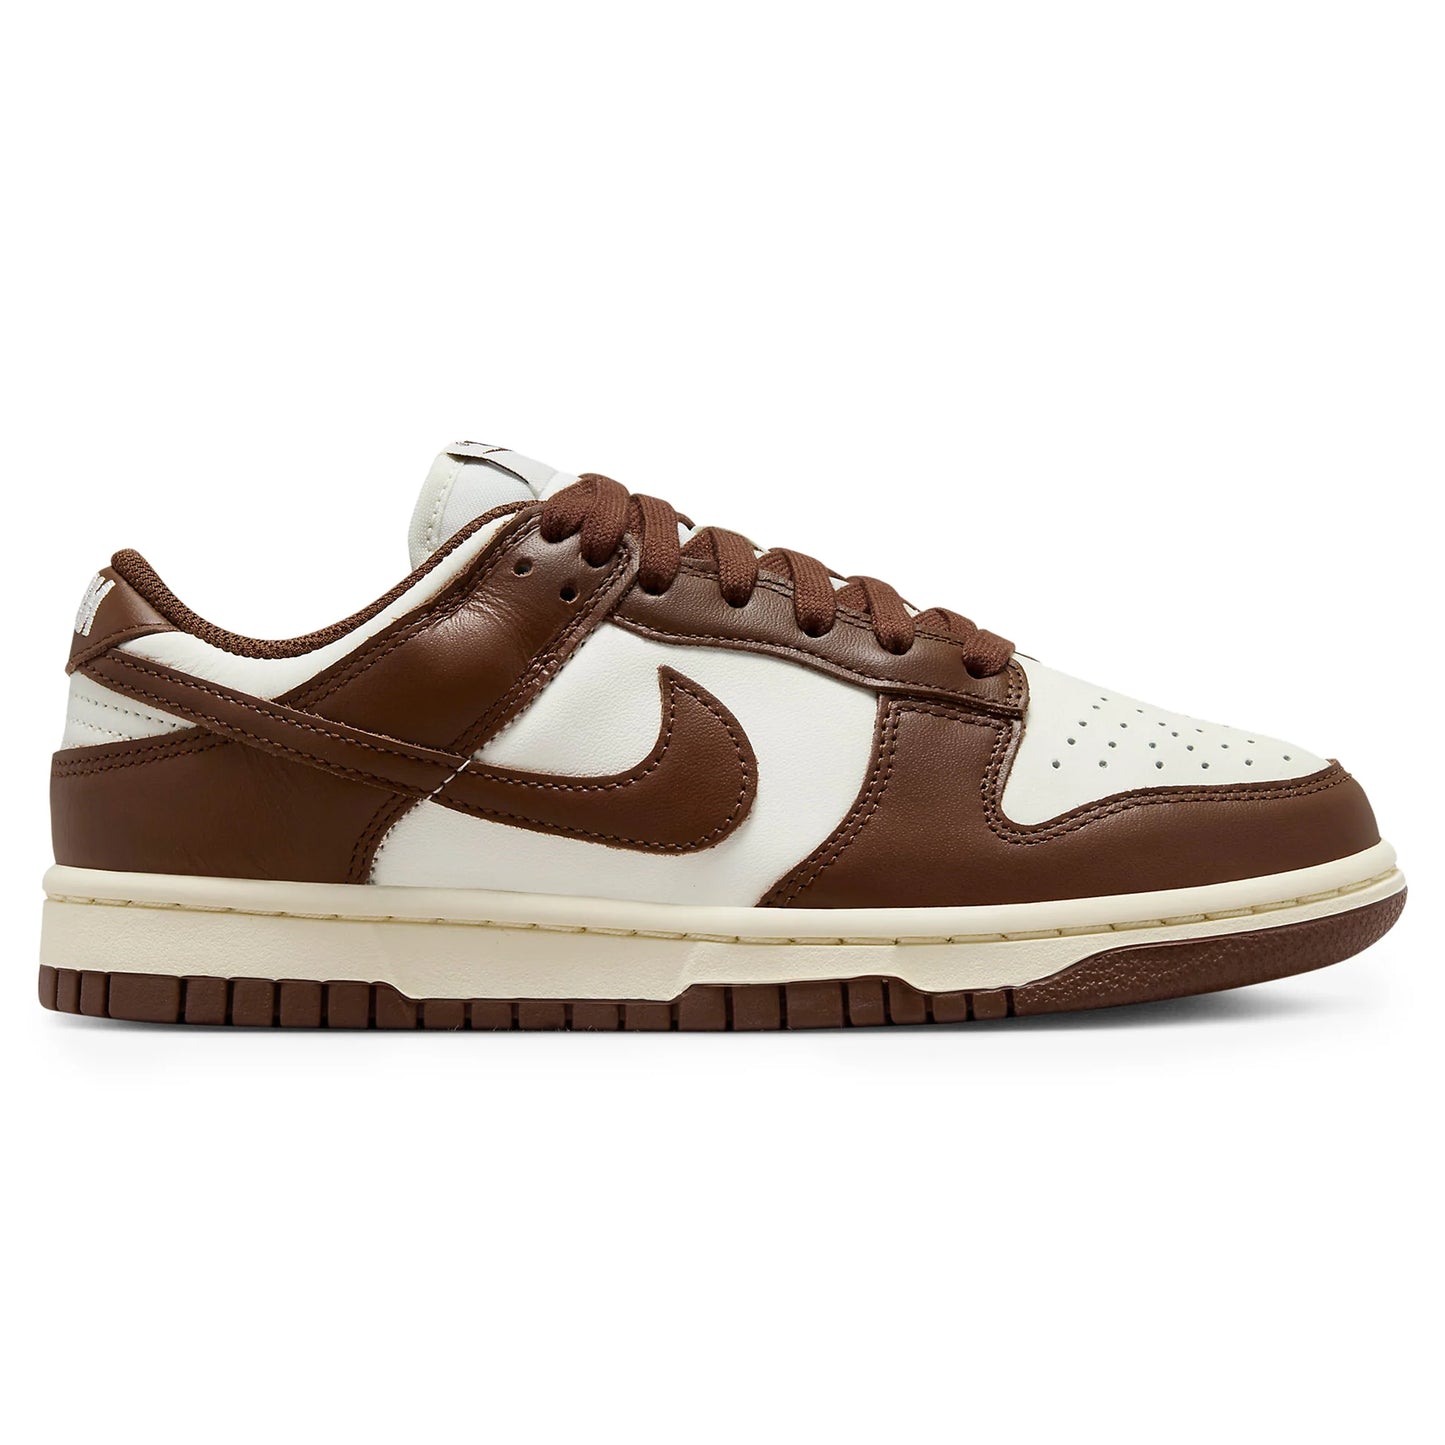 Nike Dunk Low Cacao Wow (Women's) from Nike